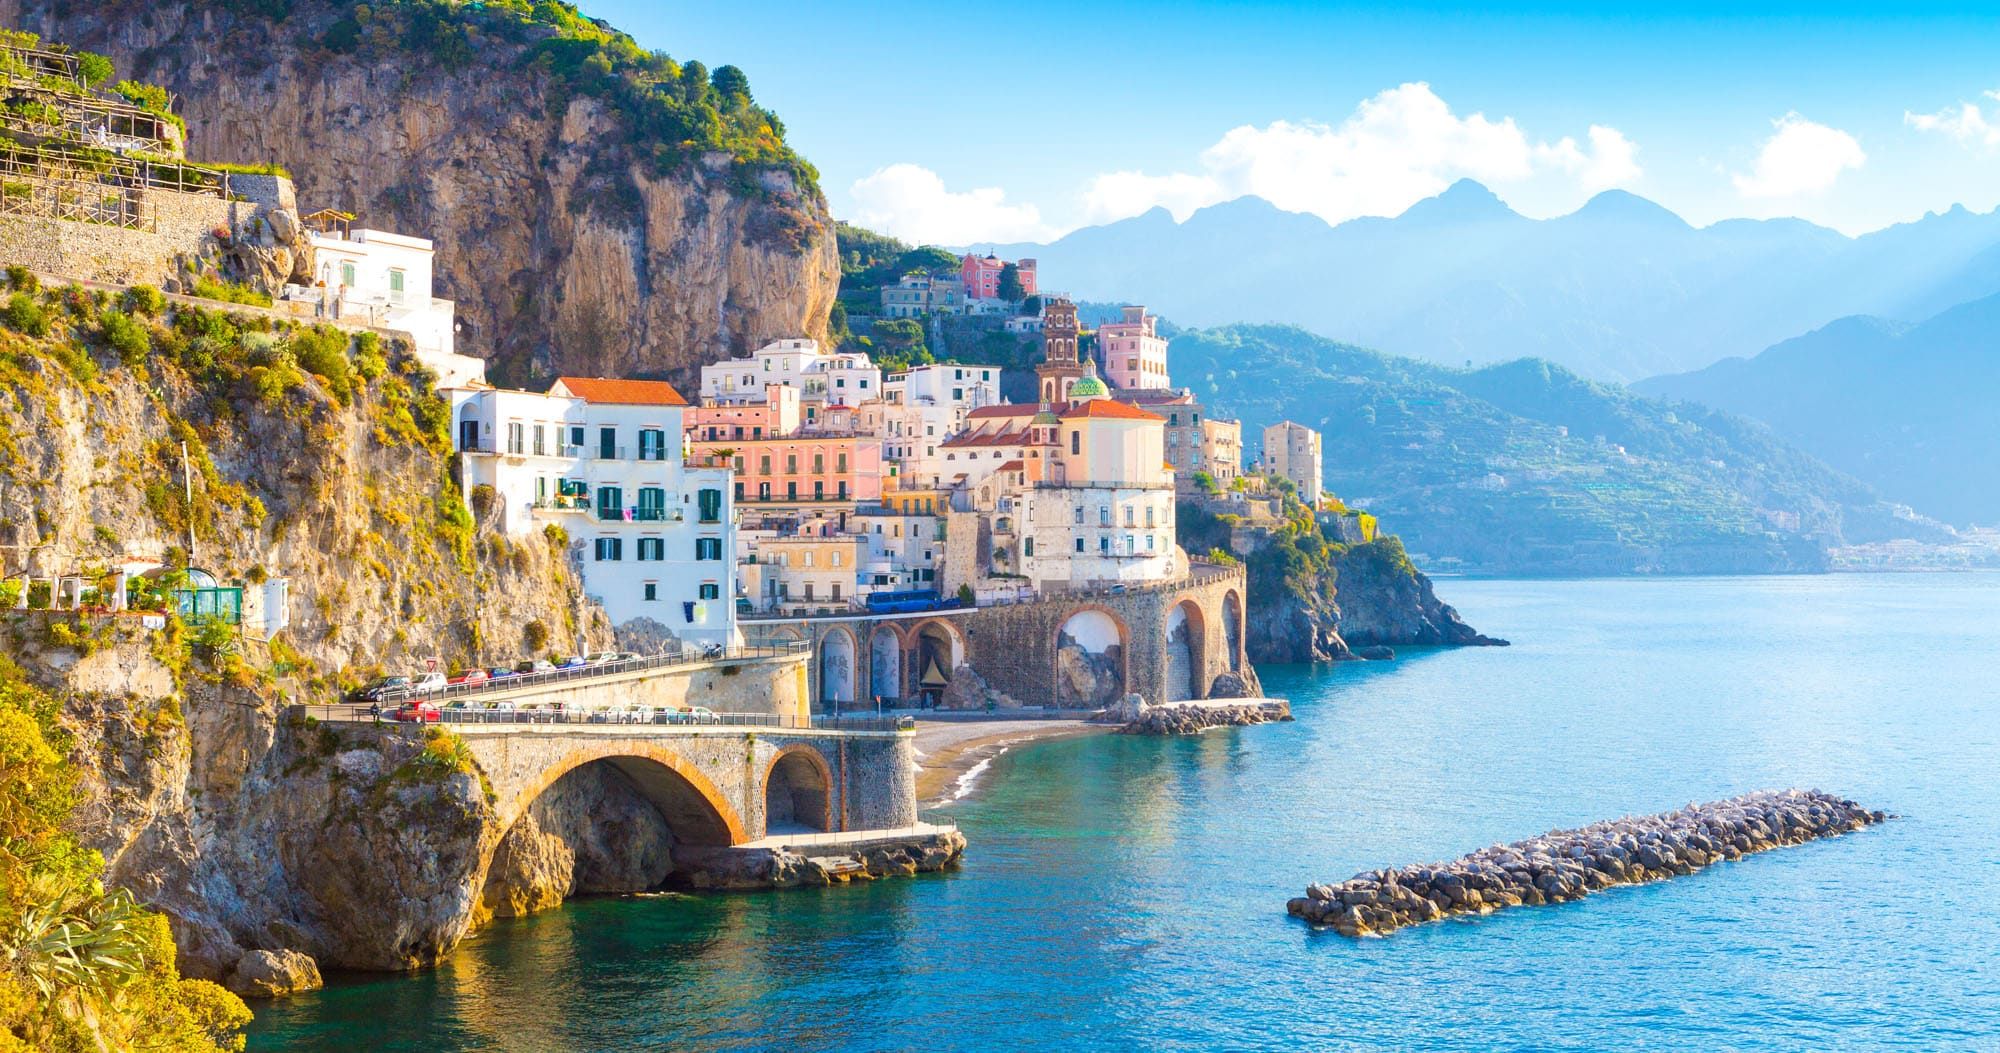 Featured image for “17 Beautiful Towns on the Amalfi Coast (+Map & Photos)”